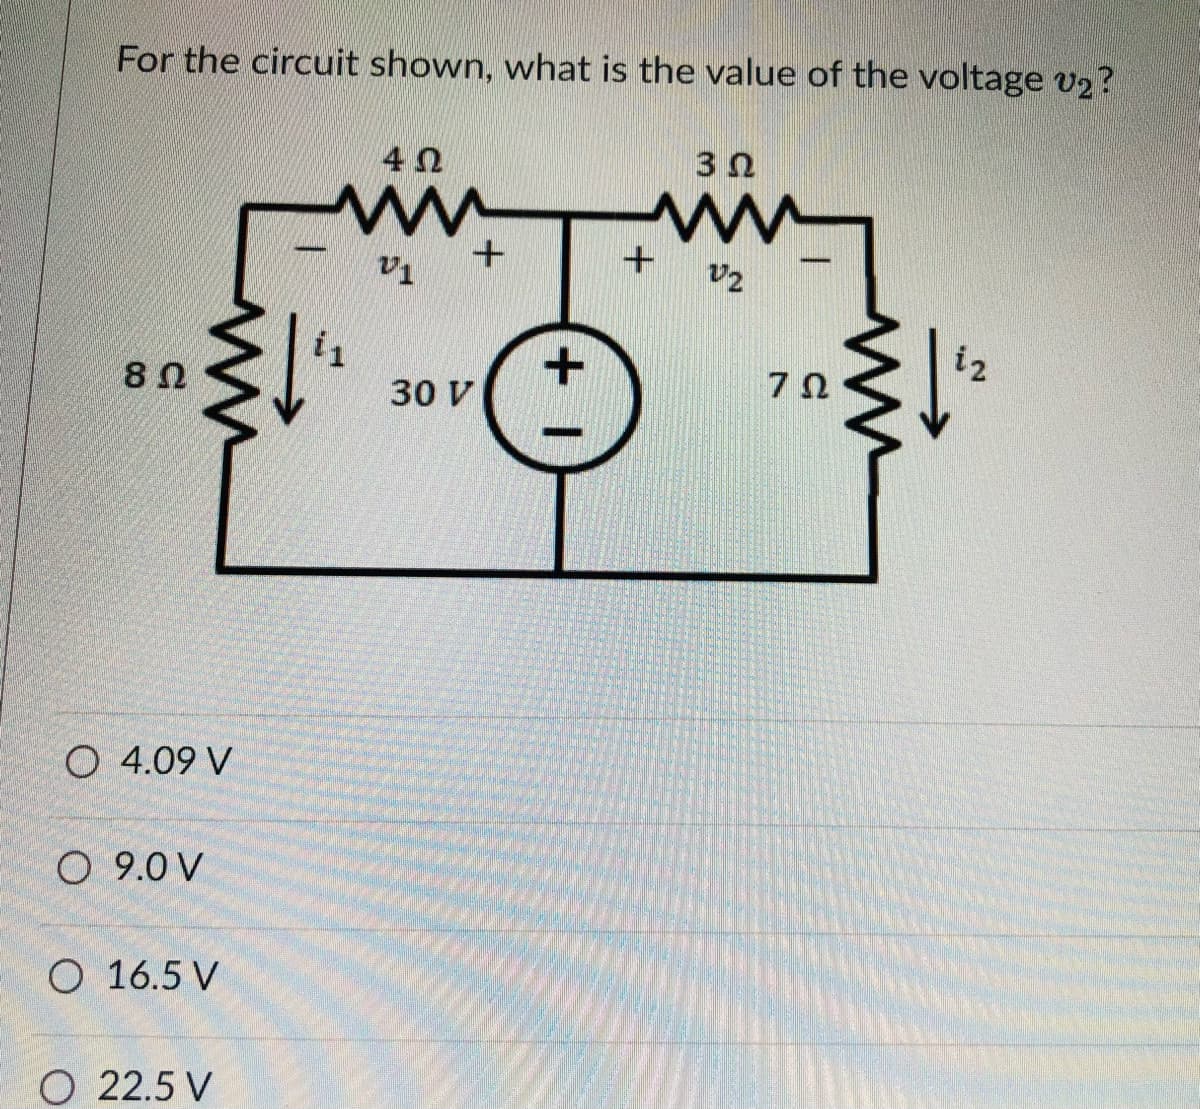 For the circuit shown, what is the value of the voltage v2?
4Ω
3Ω
v2
i2
30 V
O 4.09 V
O 9.0 V
O 16.5 V
O 22.5 V
